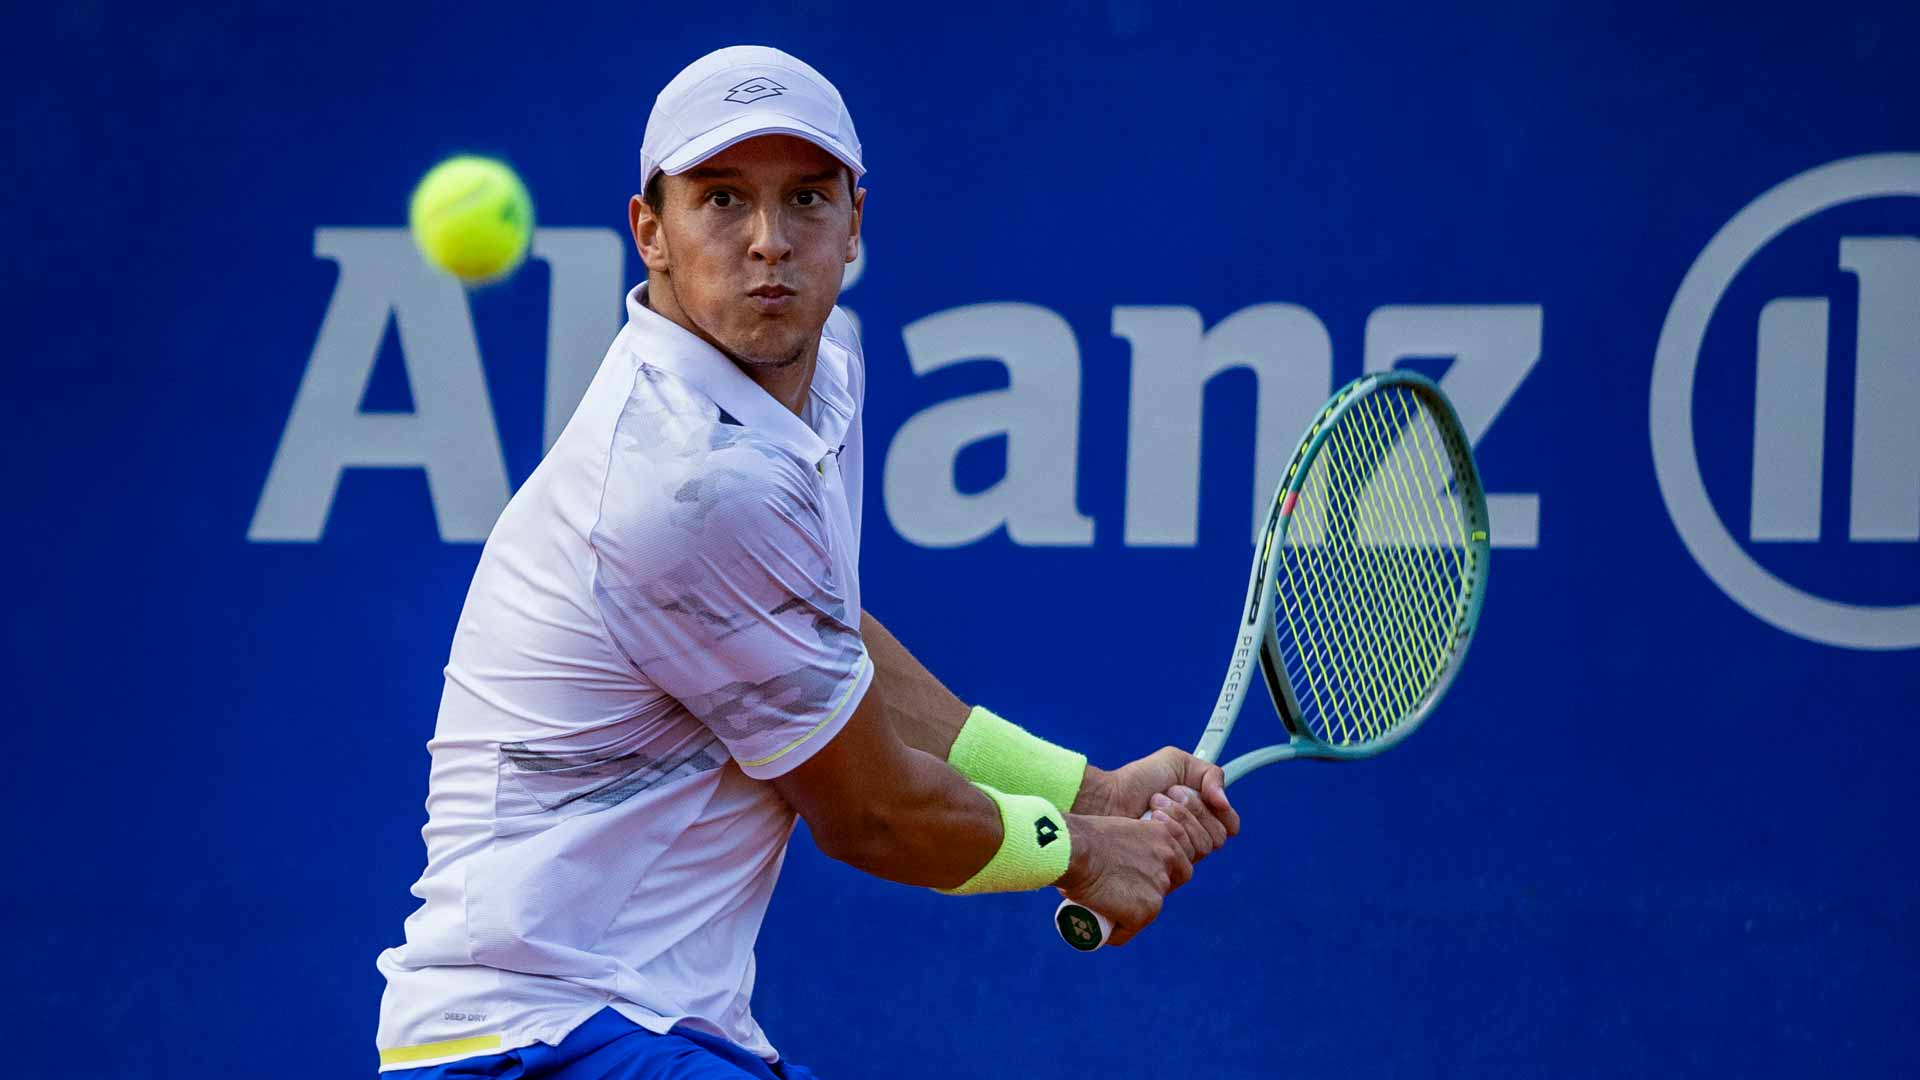 Luciano Darderi is at a career-high No. 76 in the Pepperstone ATP Rankings.